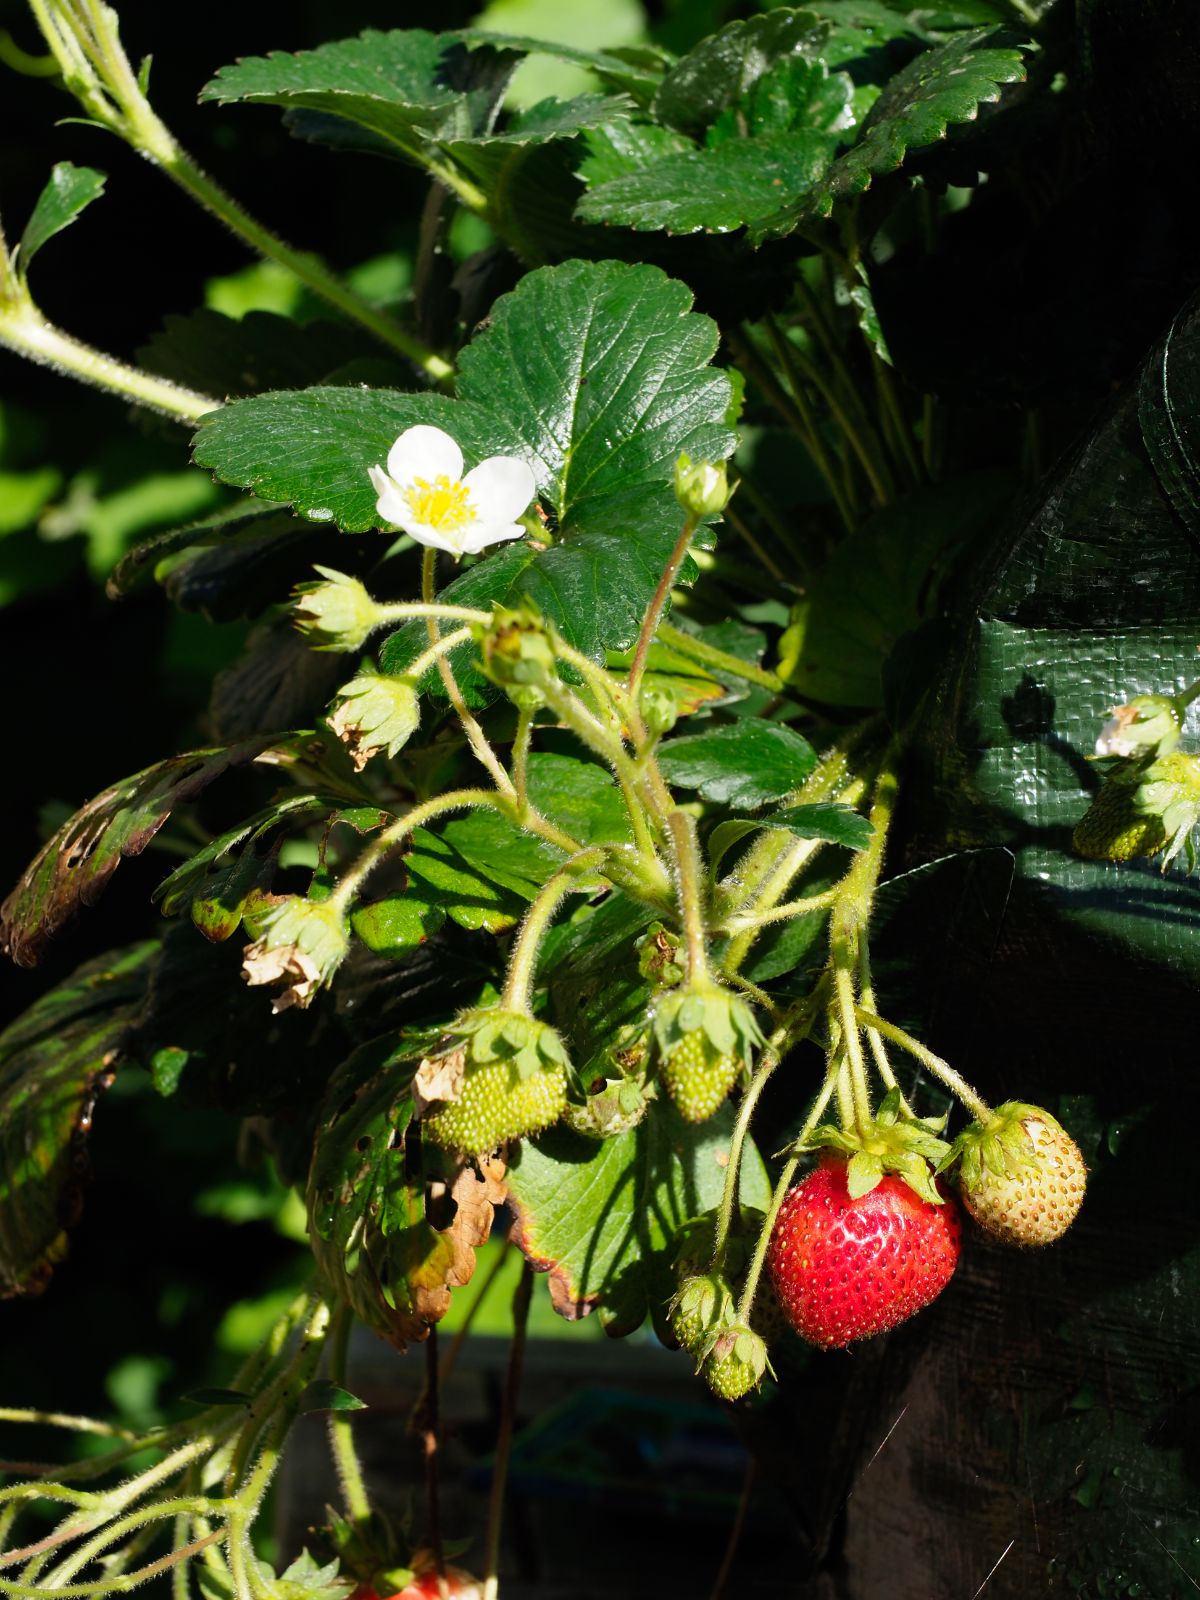 Montana strawberry variety with white flower and fruits growing in a pot.